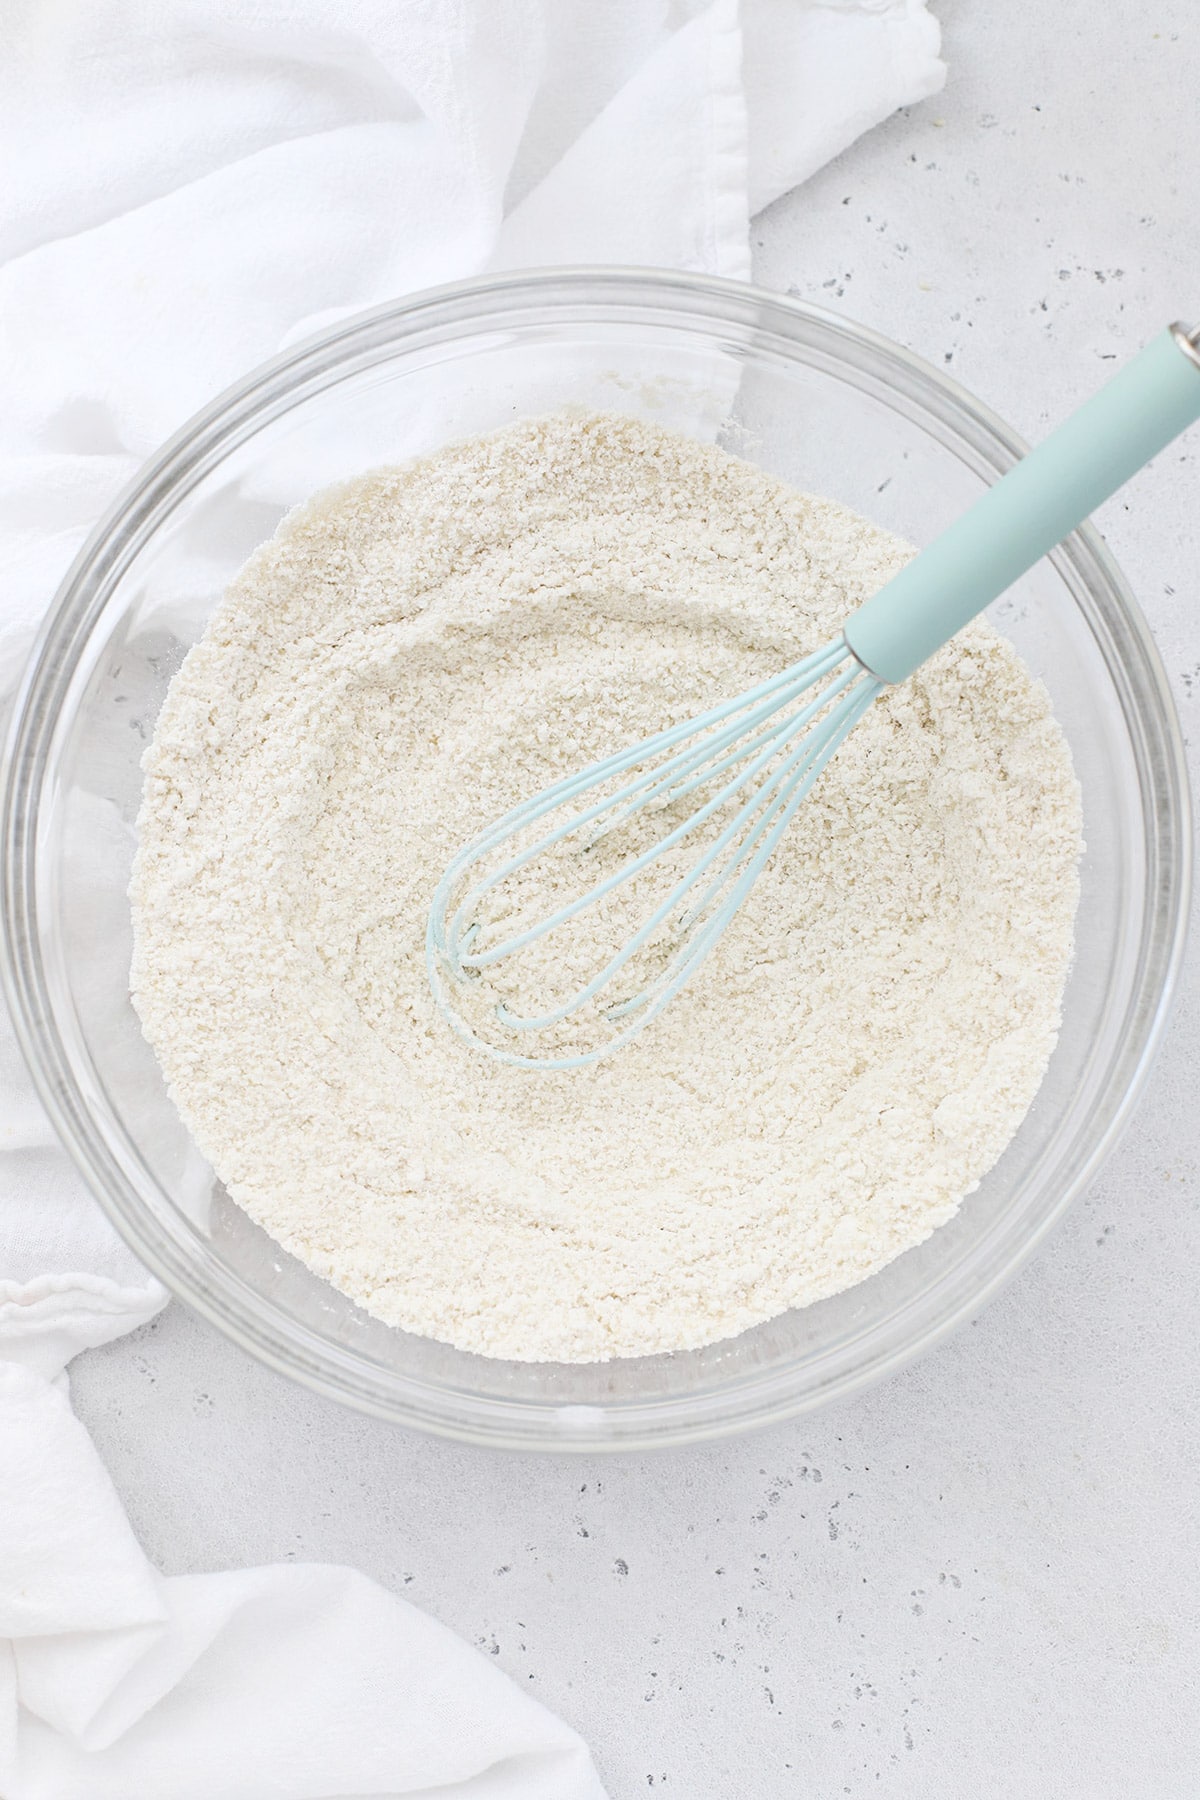 Whisked dry ingredients for gluten-free texas chocolate sheet cake